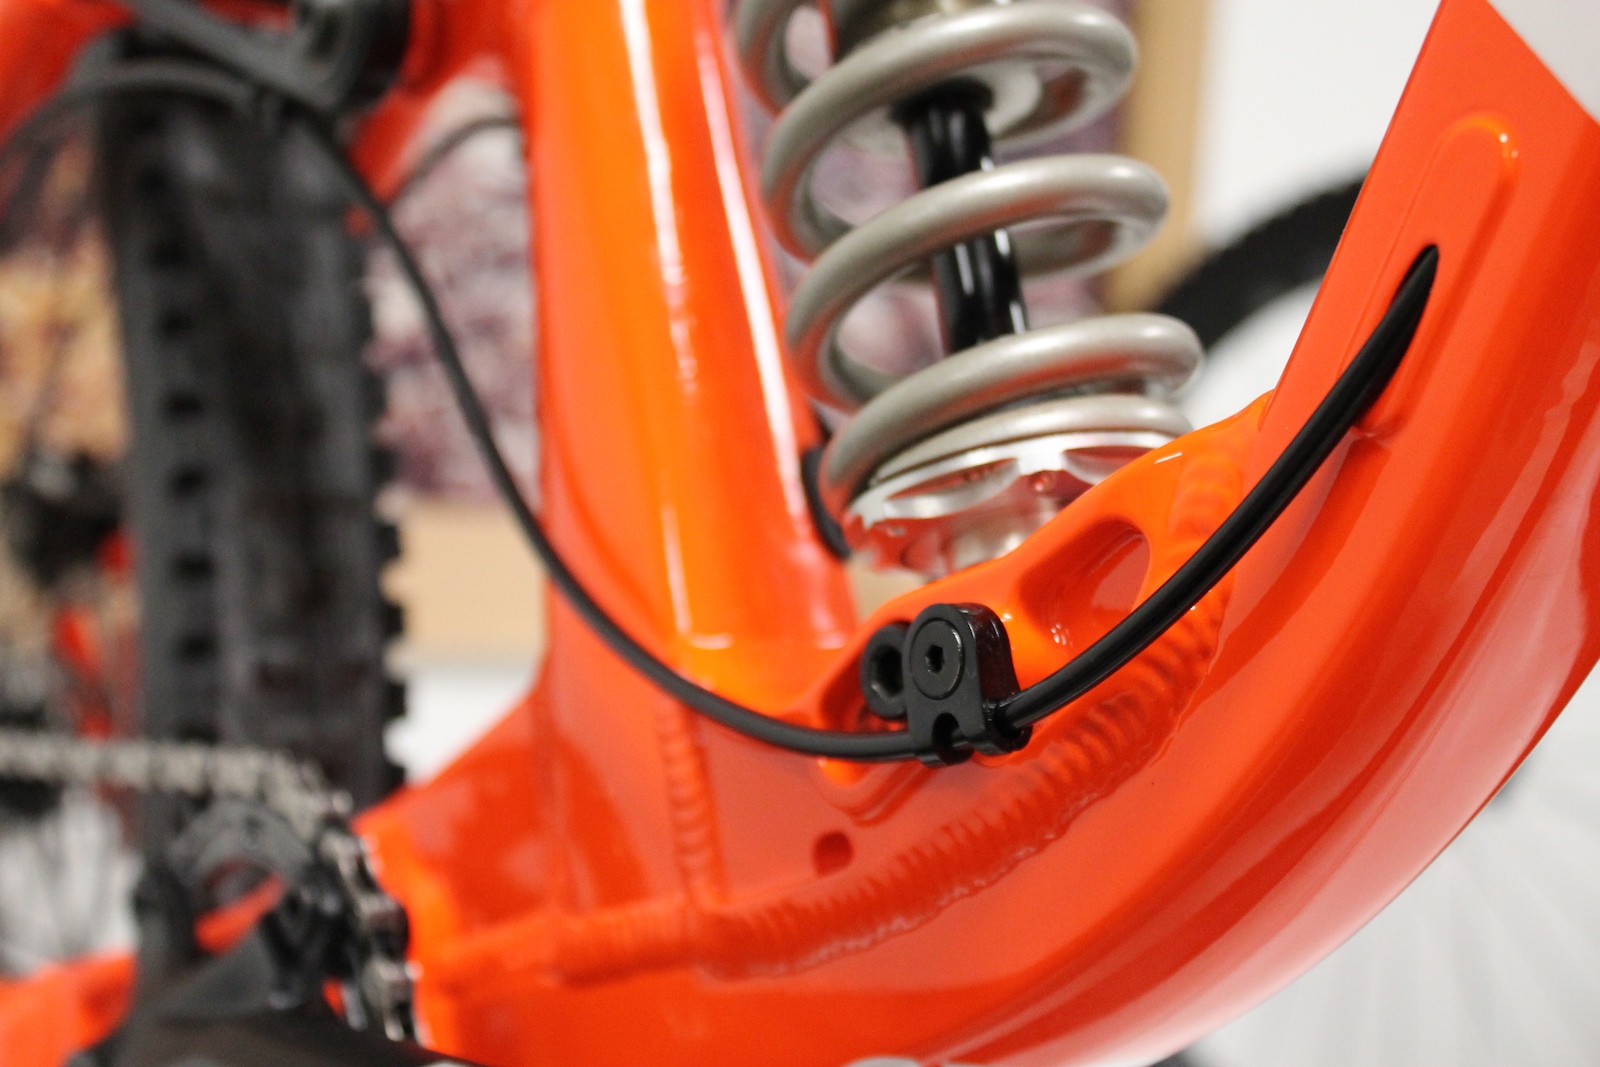 Slick internal cable routing make the lines on the bikes Delirium clean